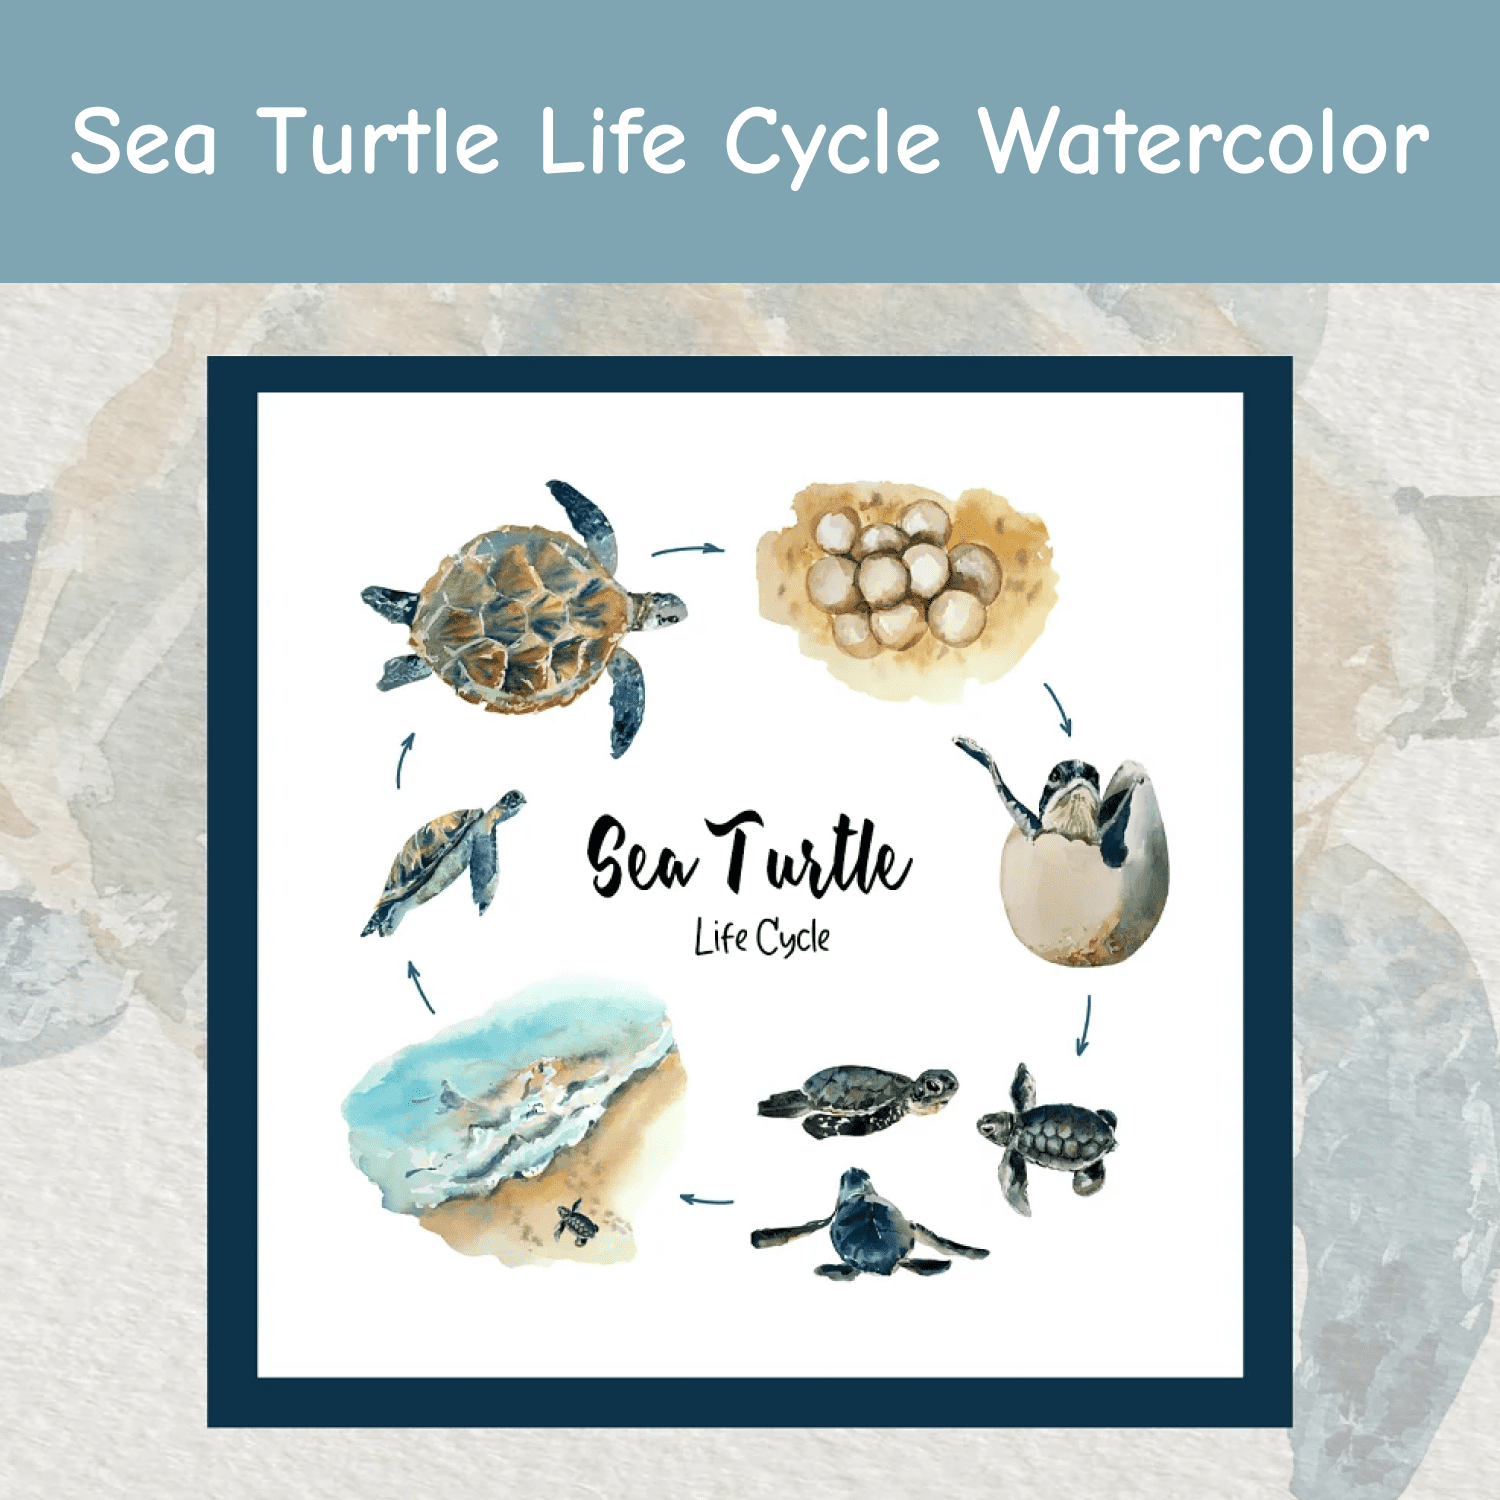 Save Sea Turtle Life Cycle Watercolor cover.